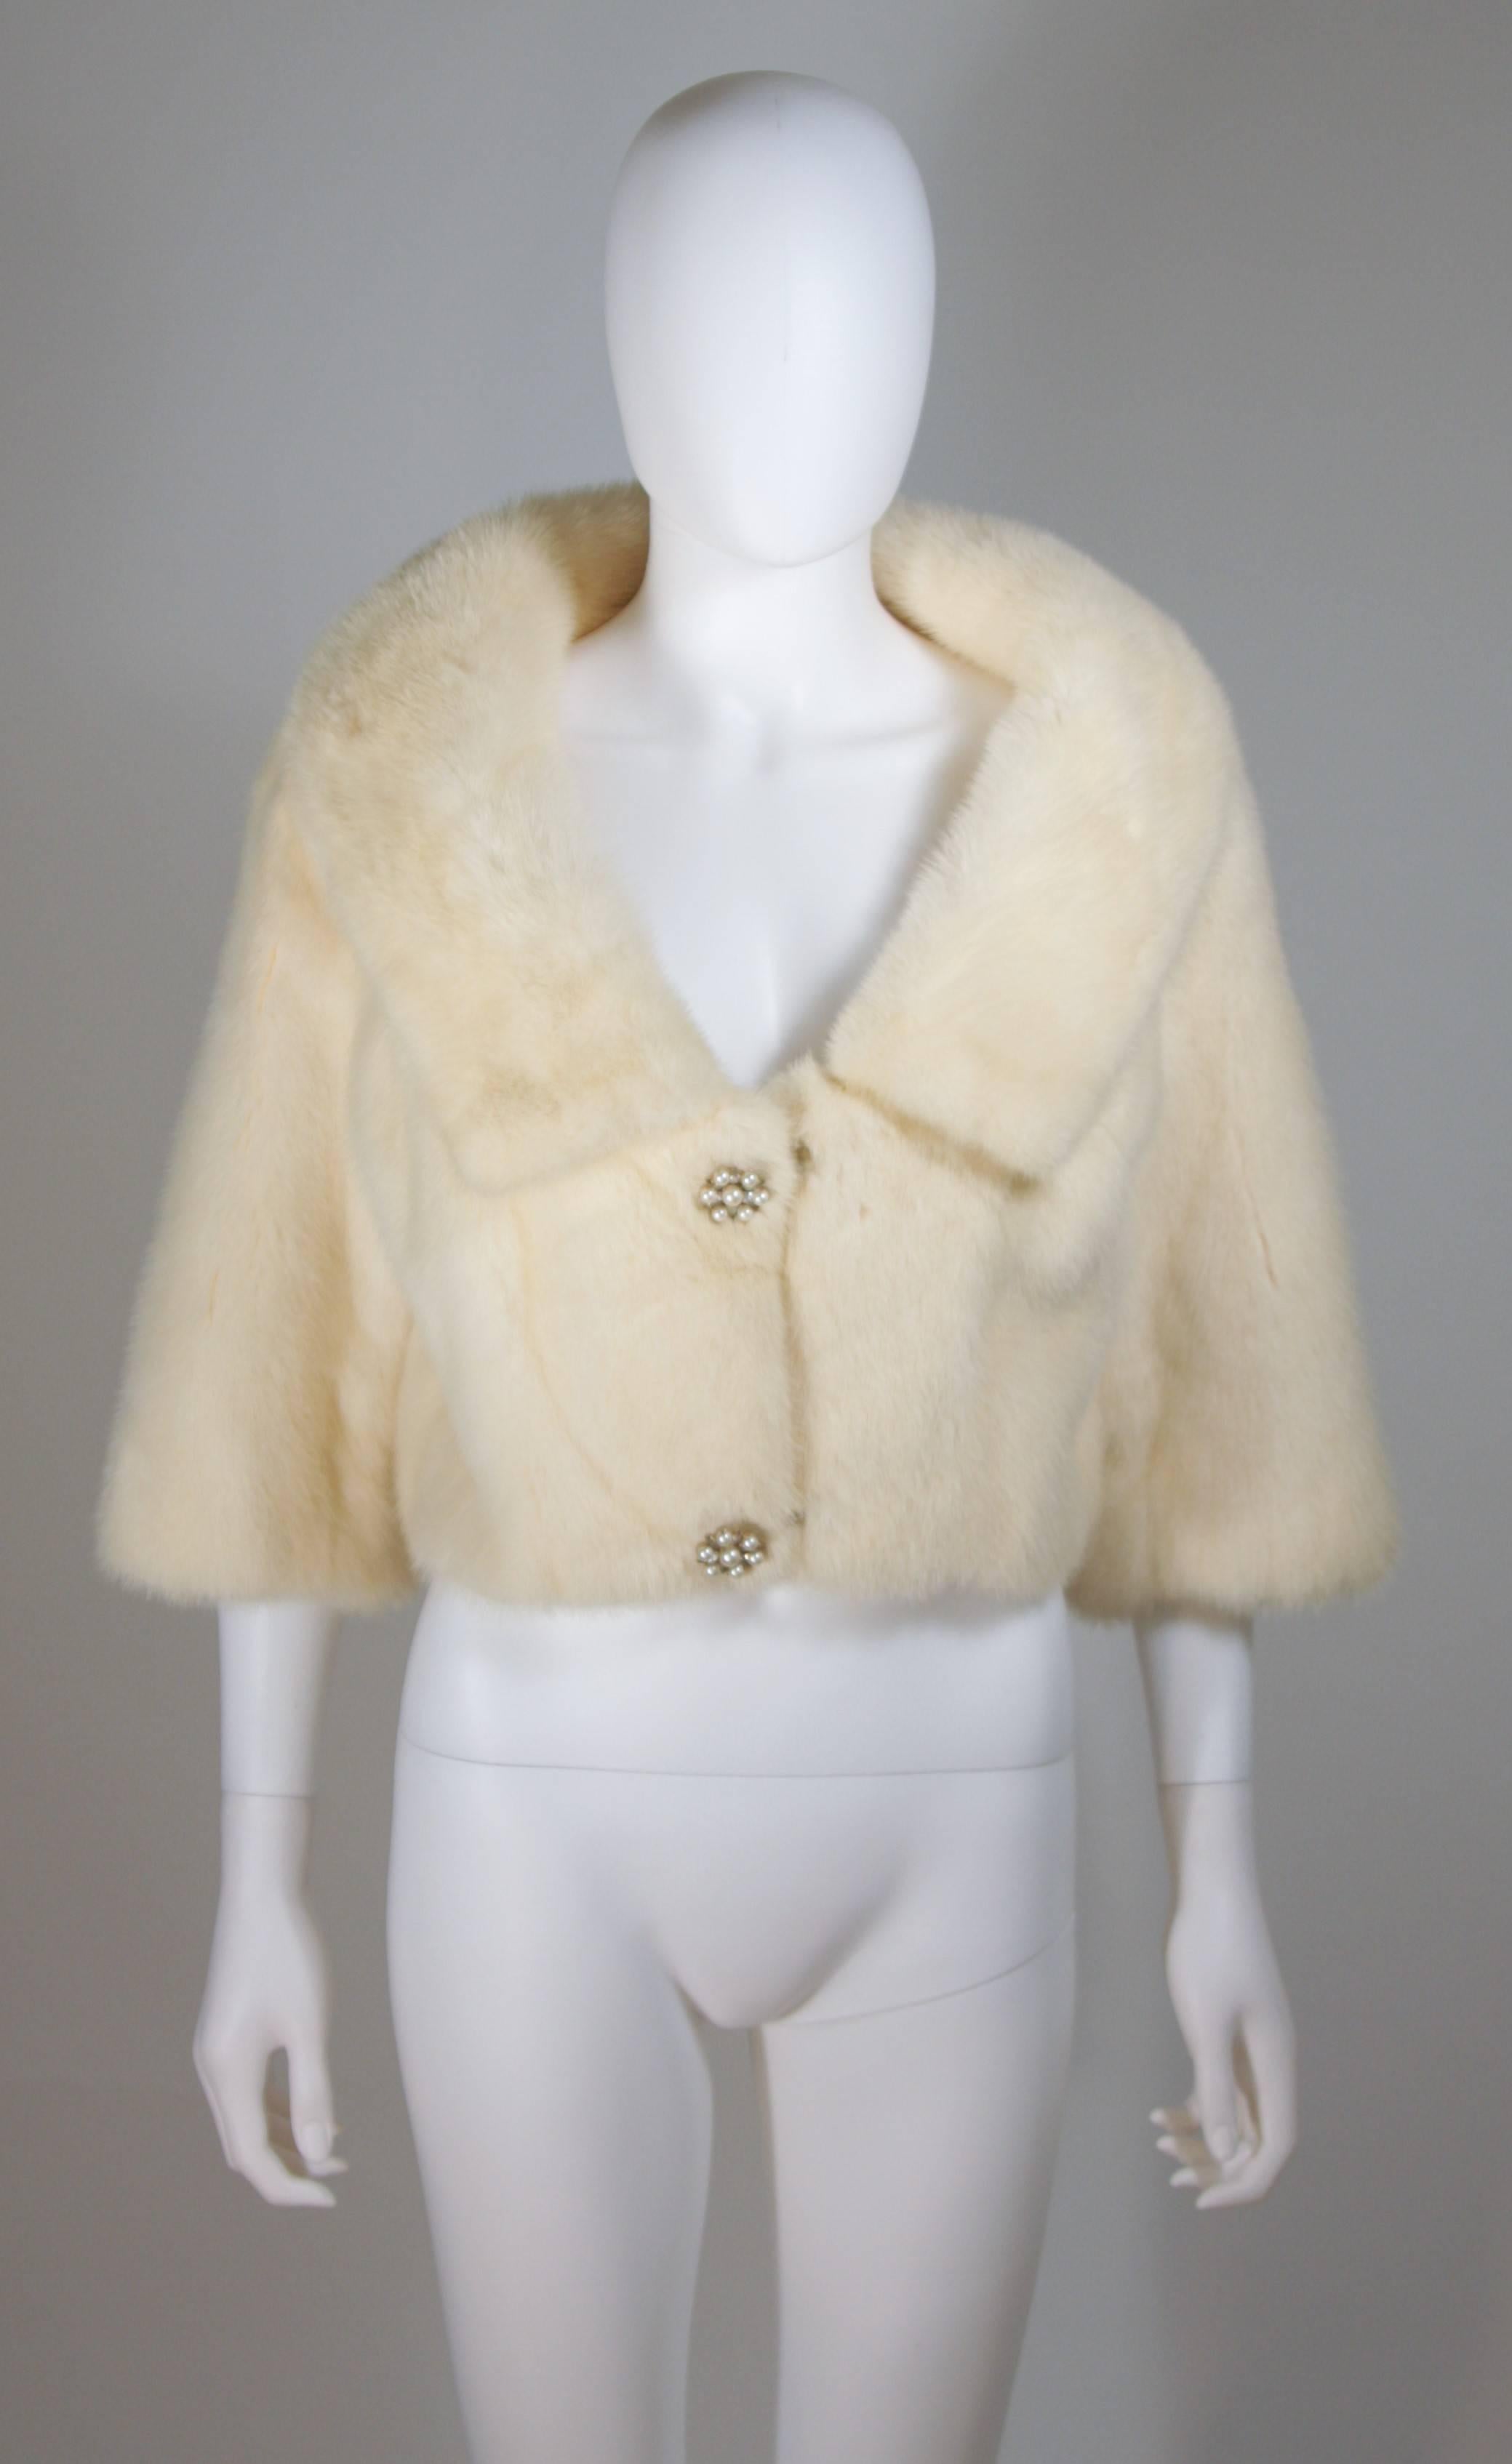  This Oleg Cassini jacket is composed of an off-white/cream hue mink. Features large rhinestone and faux pearl buttons. In excellent vintage condition, the lining does have some discoloration due to age. 

  **Please cross-reference measurements